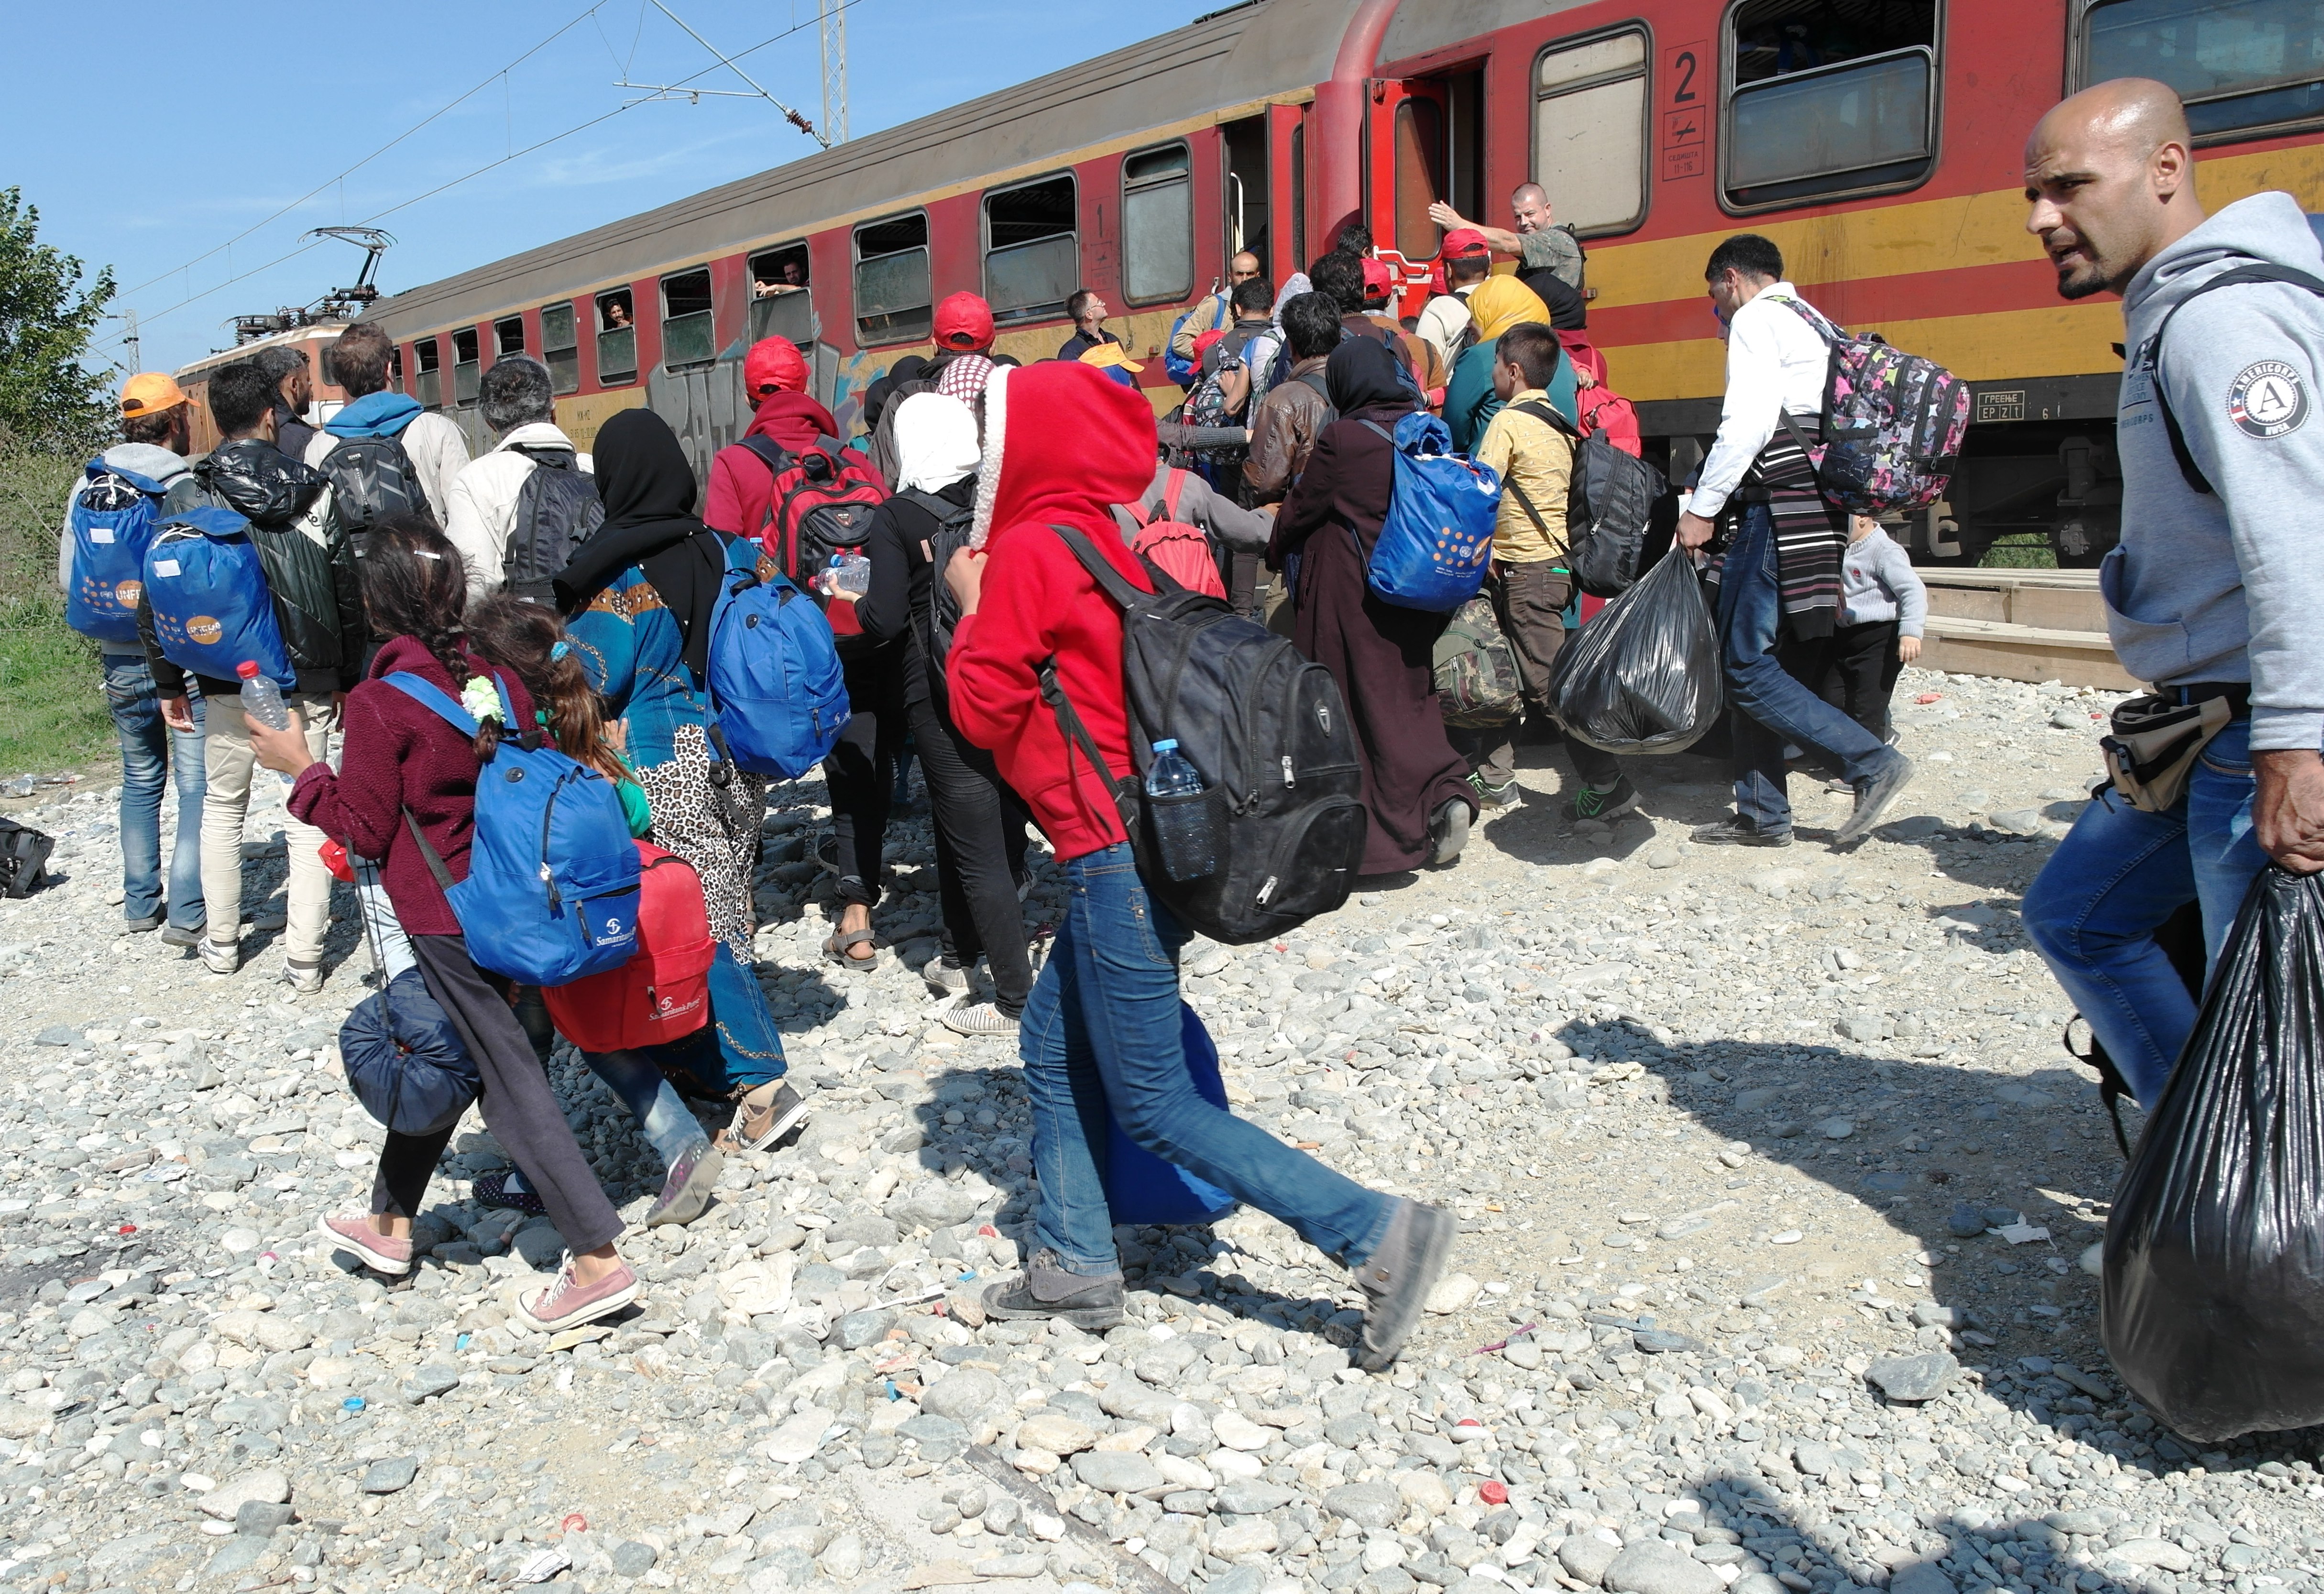 Vulnerable migrants in Gevgelija, Former Yugoslav Republic of Macedonia, catching a train to the northern border with Serbia.